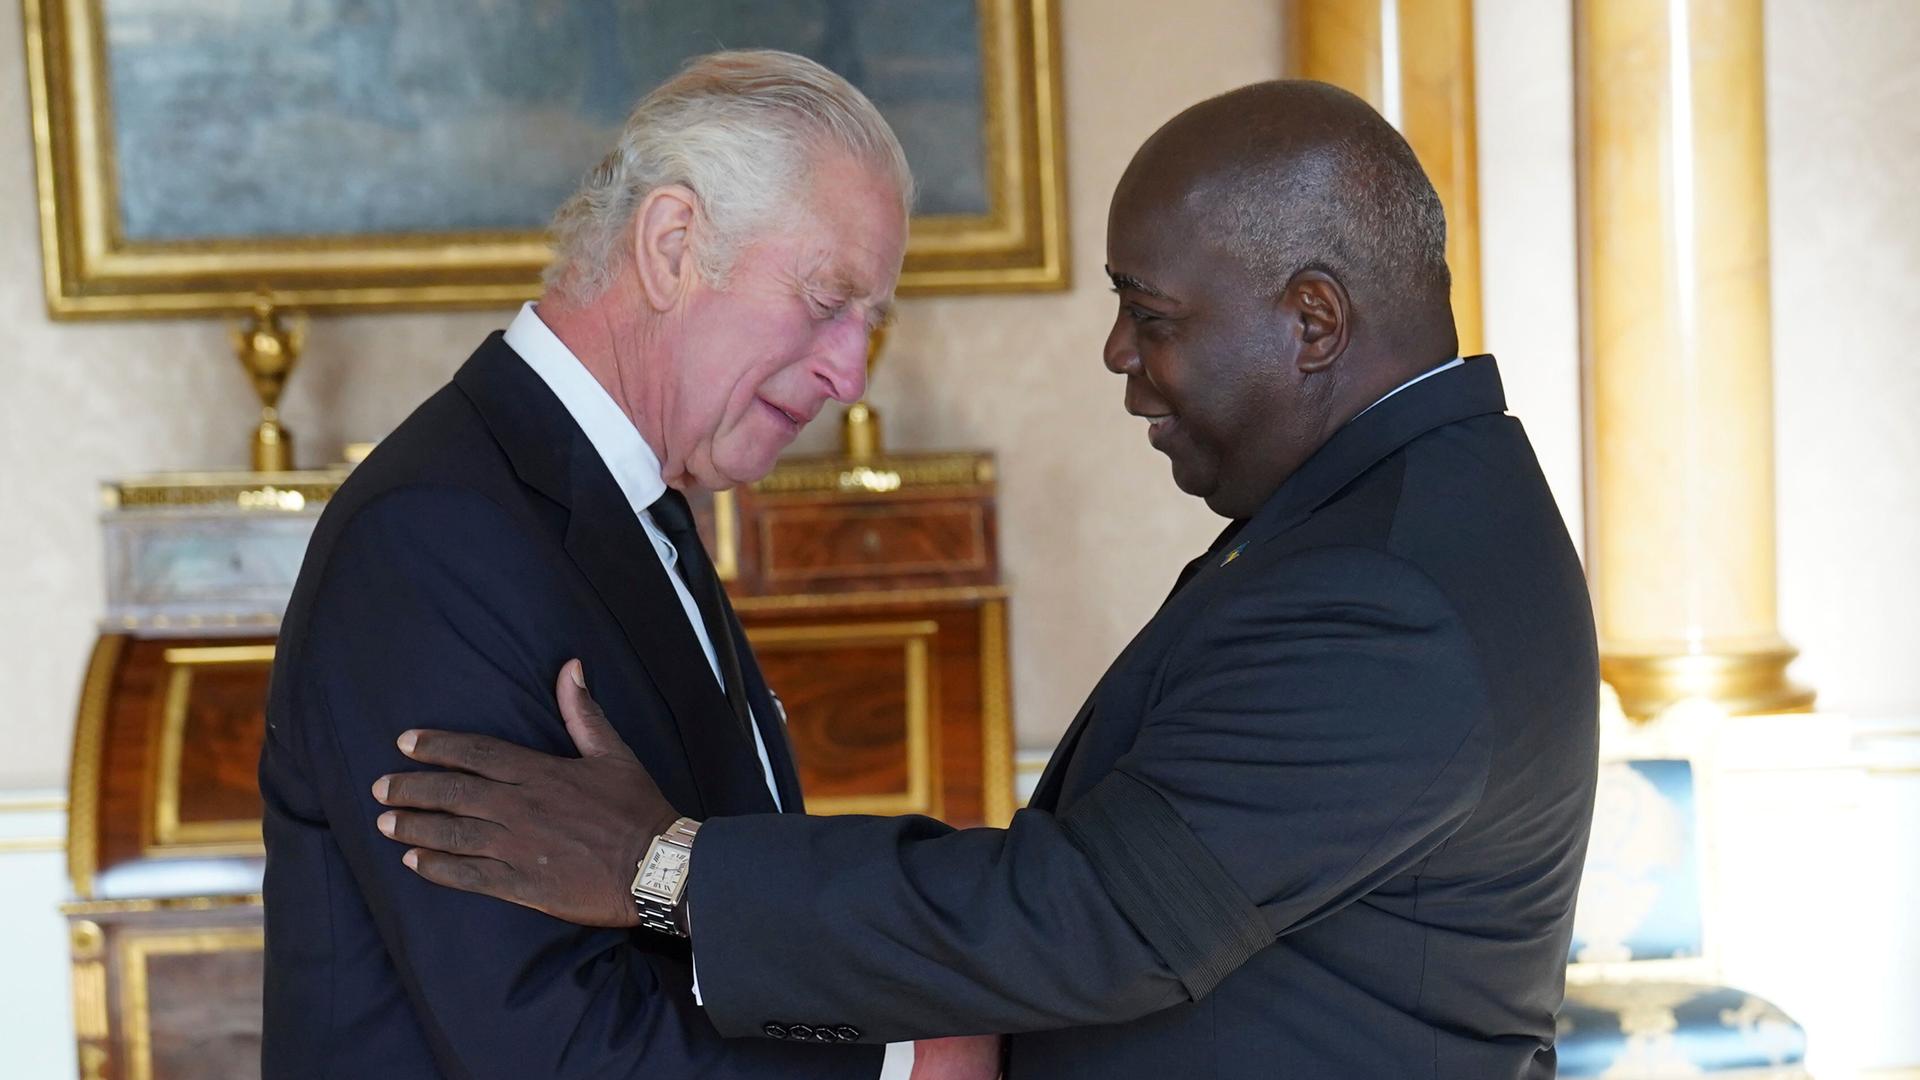 The Prime Minister Of The Bahamas, Philip Davis, A Black Man, Gives King Charles Iii.  Hand And Put The Other Hand On His Upper Arm.